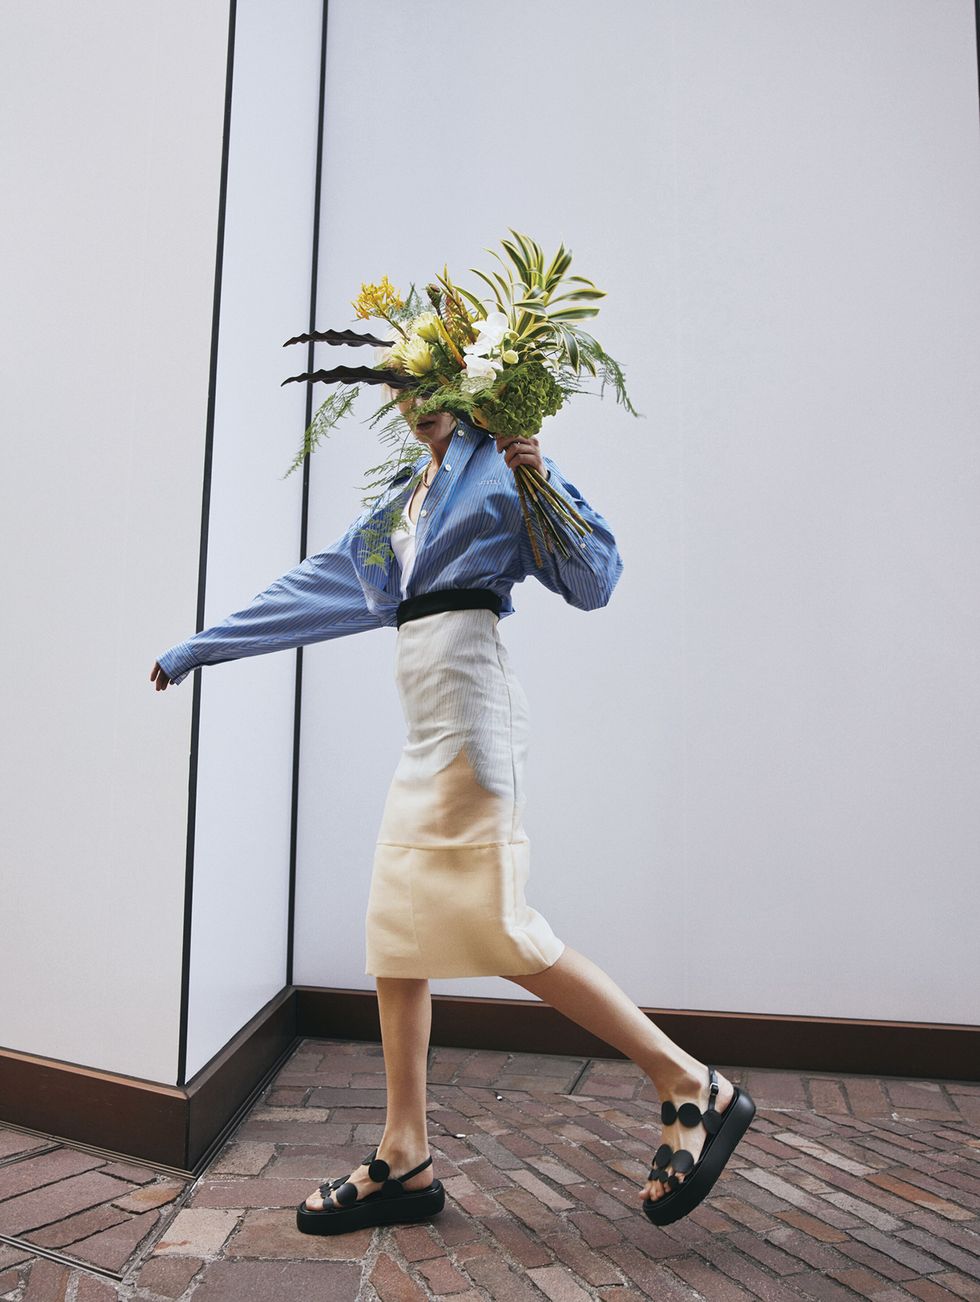 a person wearing a blue dress and holding flowers